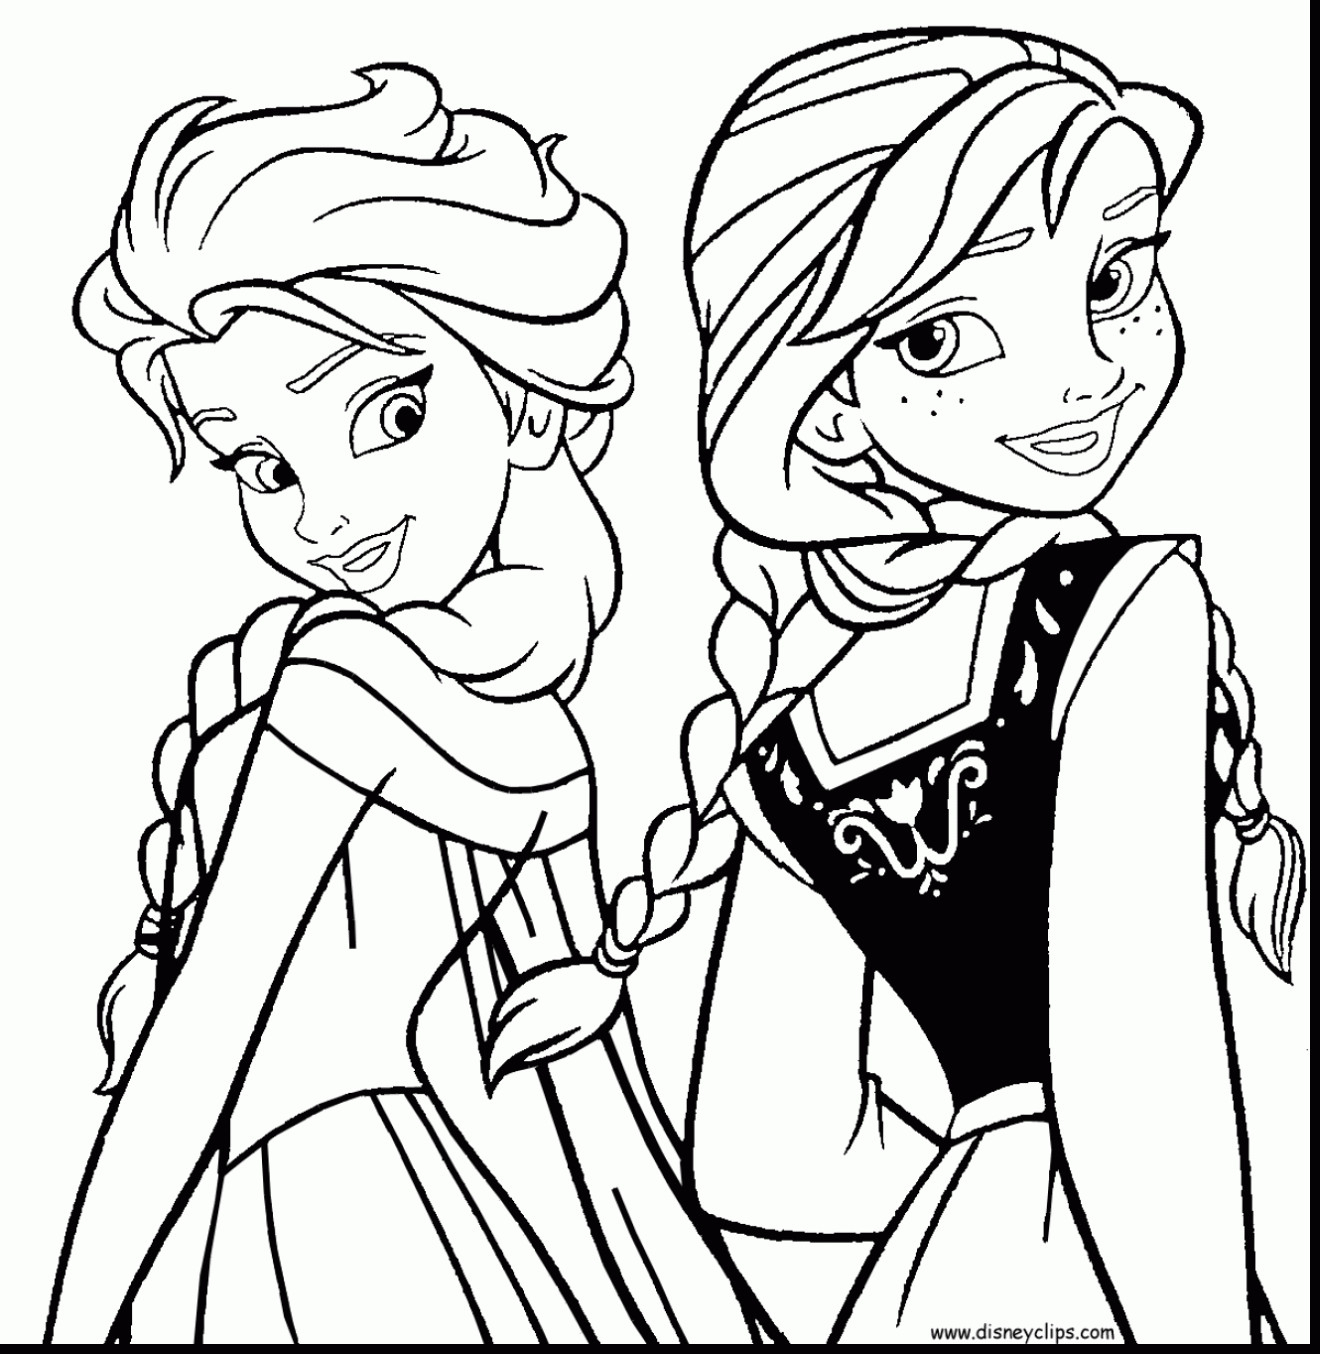 Coloring Pages Online To Print Anna And Elsa Coloring Pages Online Printable Photos Of Humorous